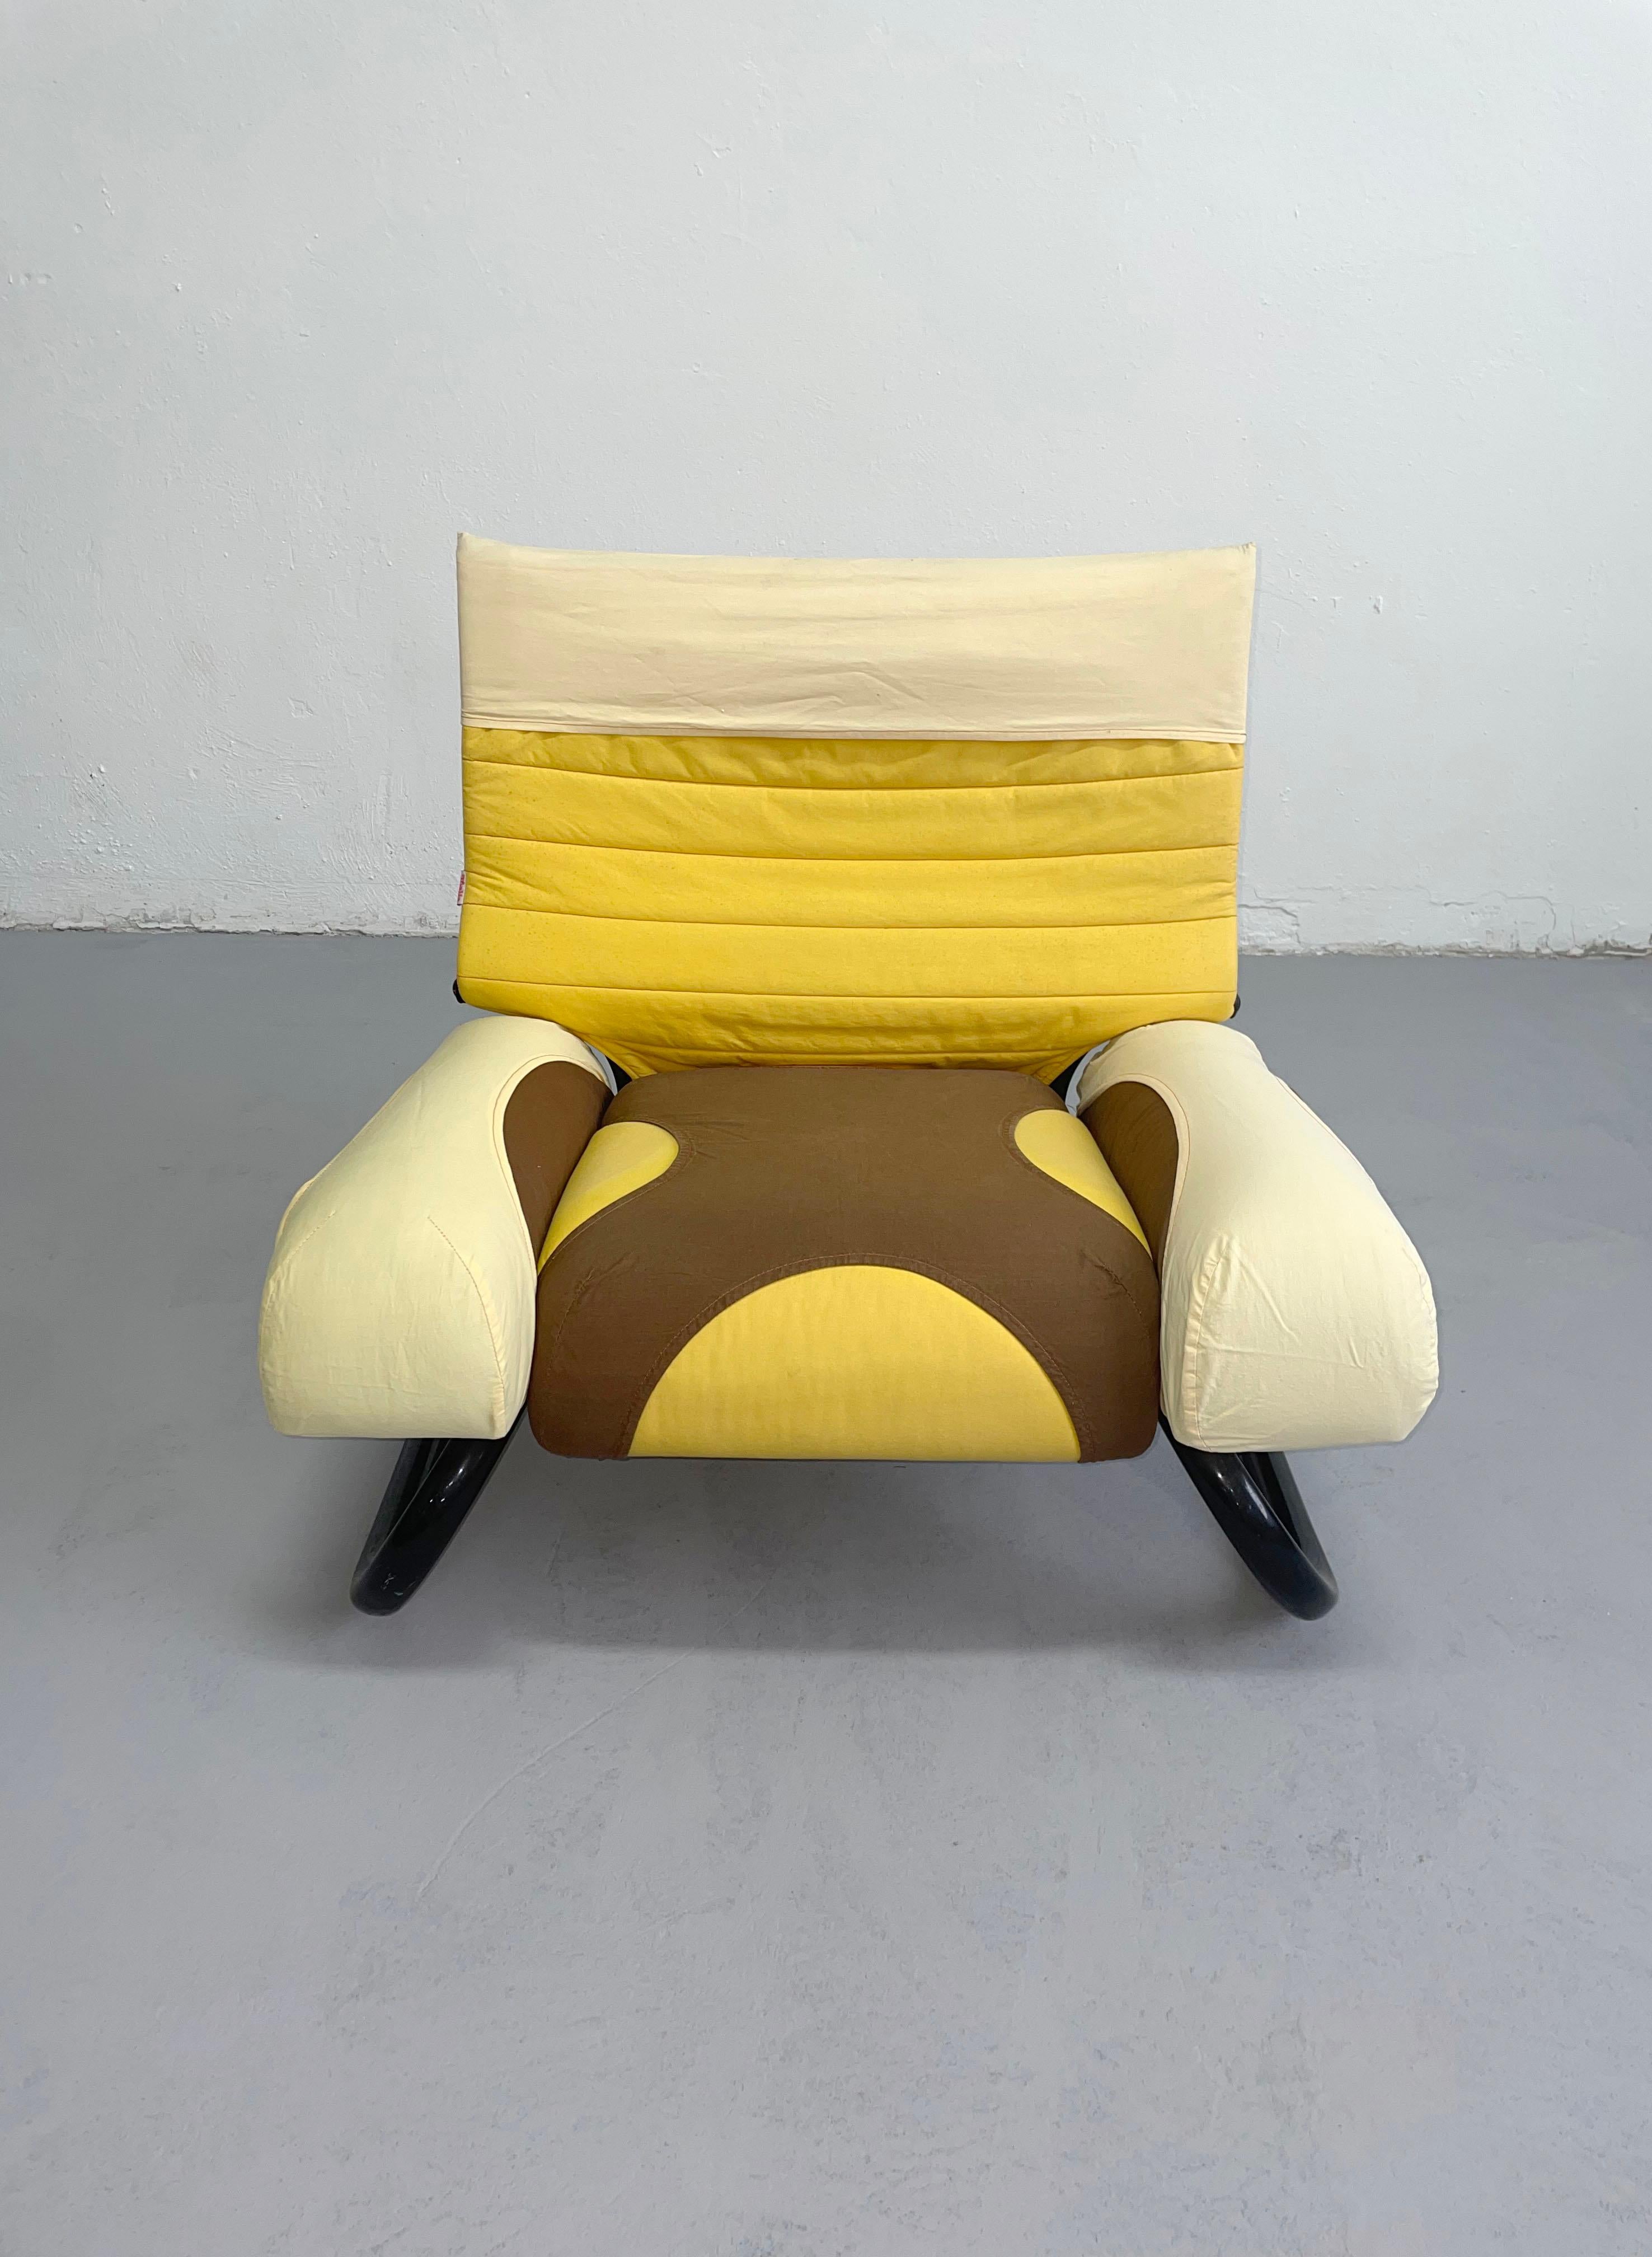 Italian Postmodern 'Peter Pan' Lounge Chair, Michele De Lucchi for Thalia&Co, Italy 1982 For Sale